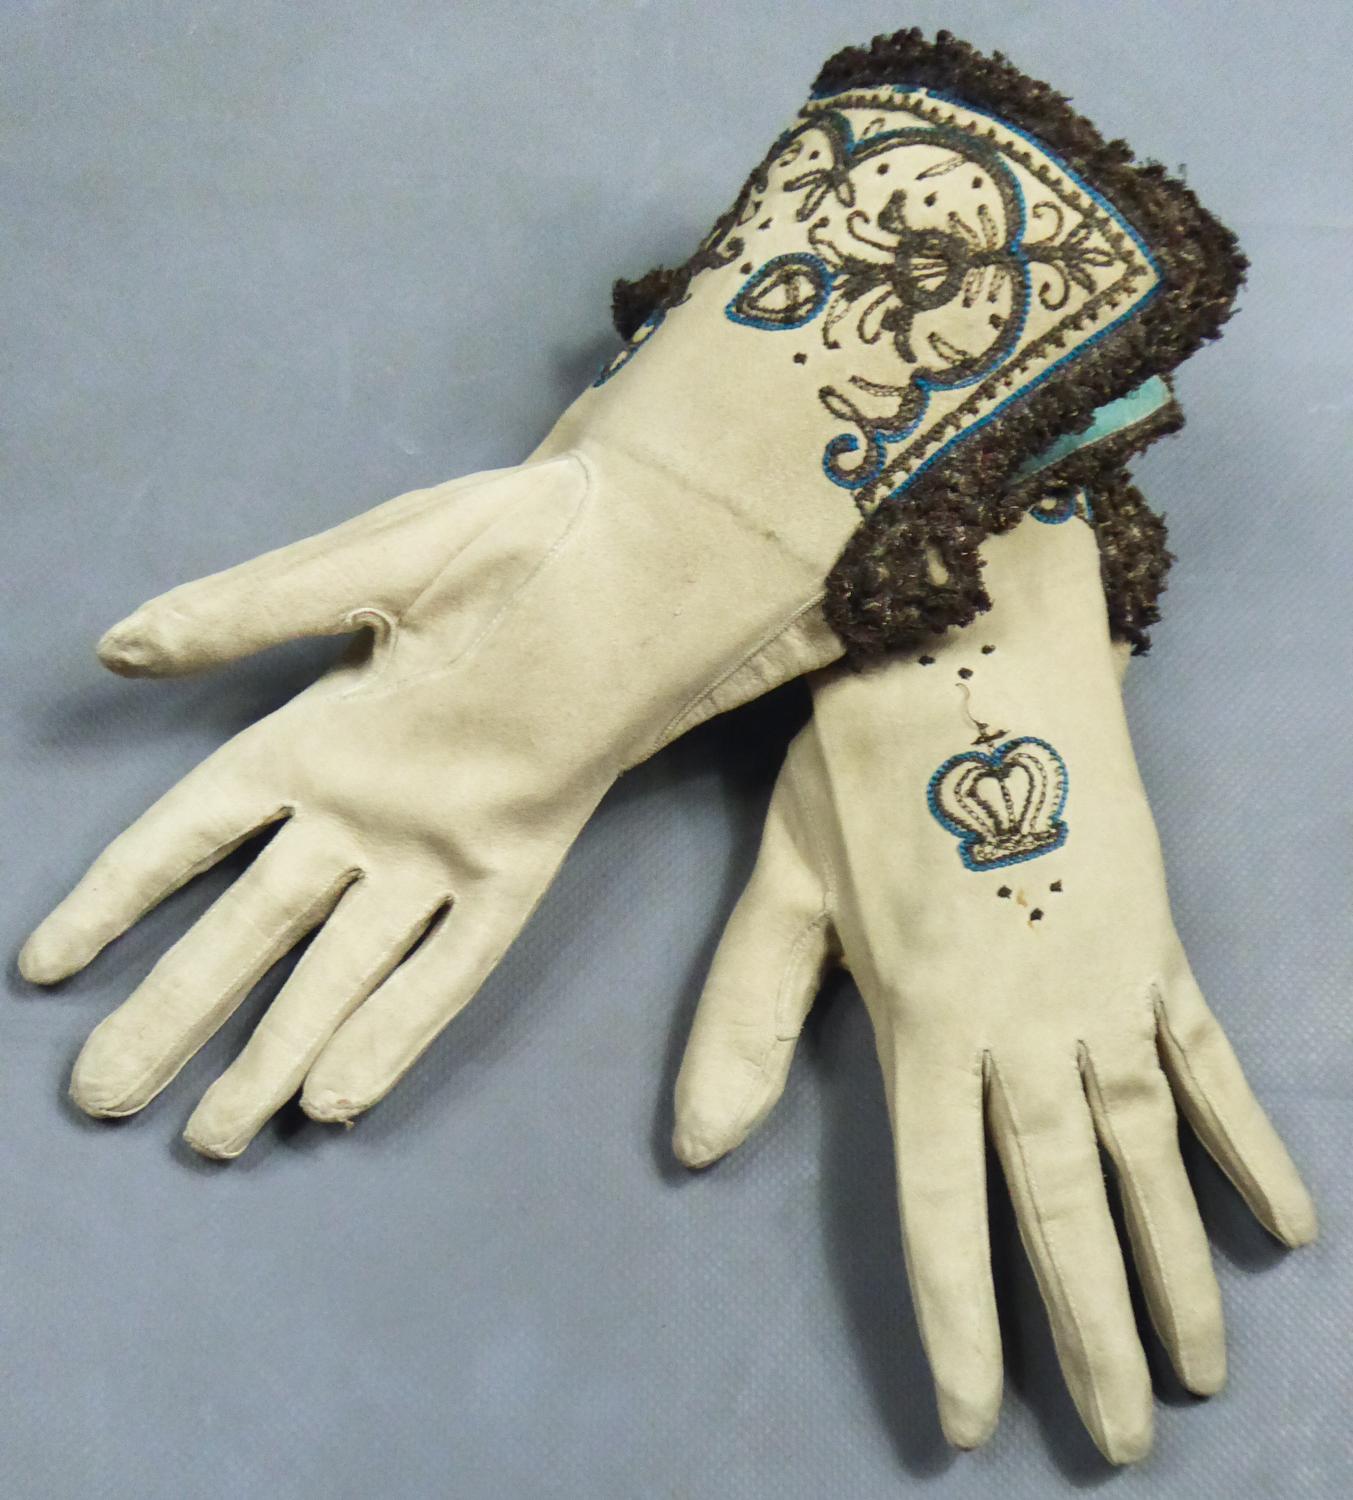 Women's or Men's Pair of Leather Bishop's Gloves 17th Century Style - England Late 19th century